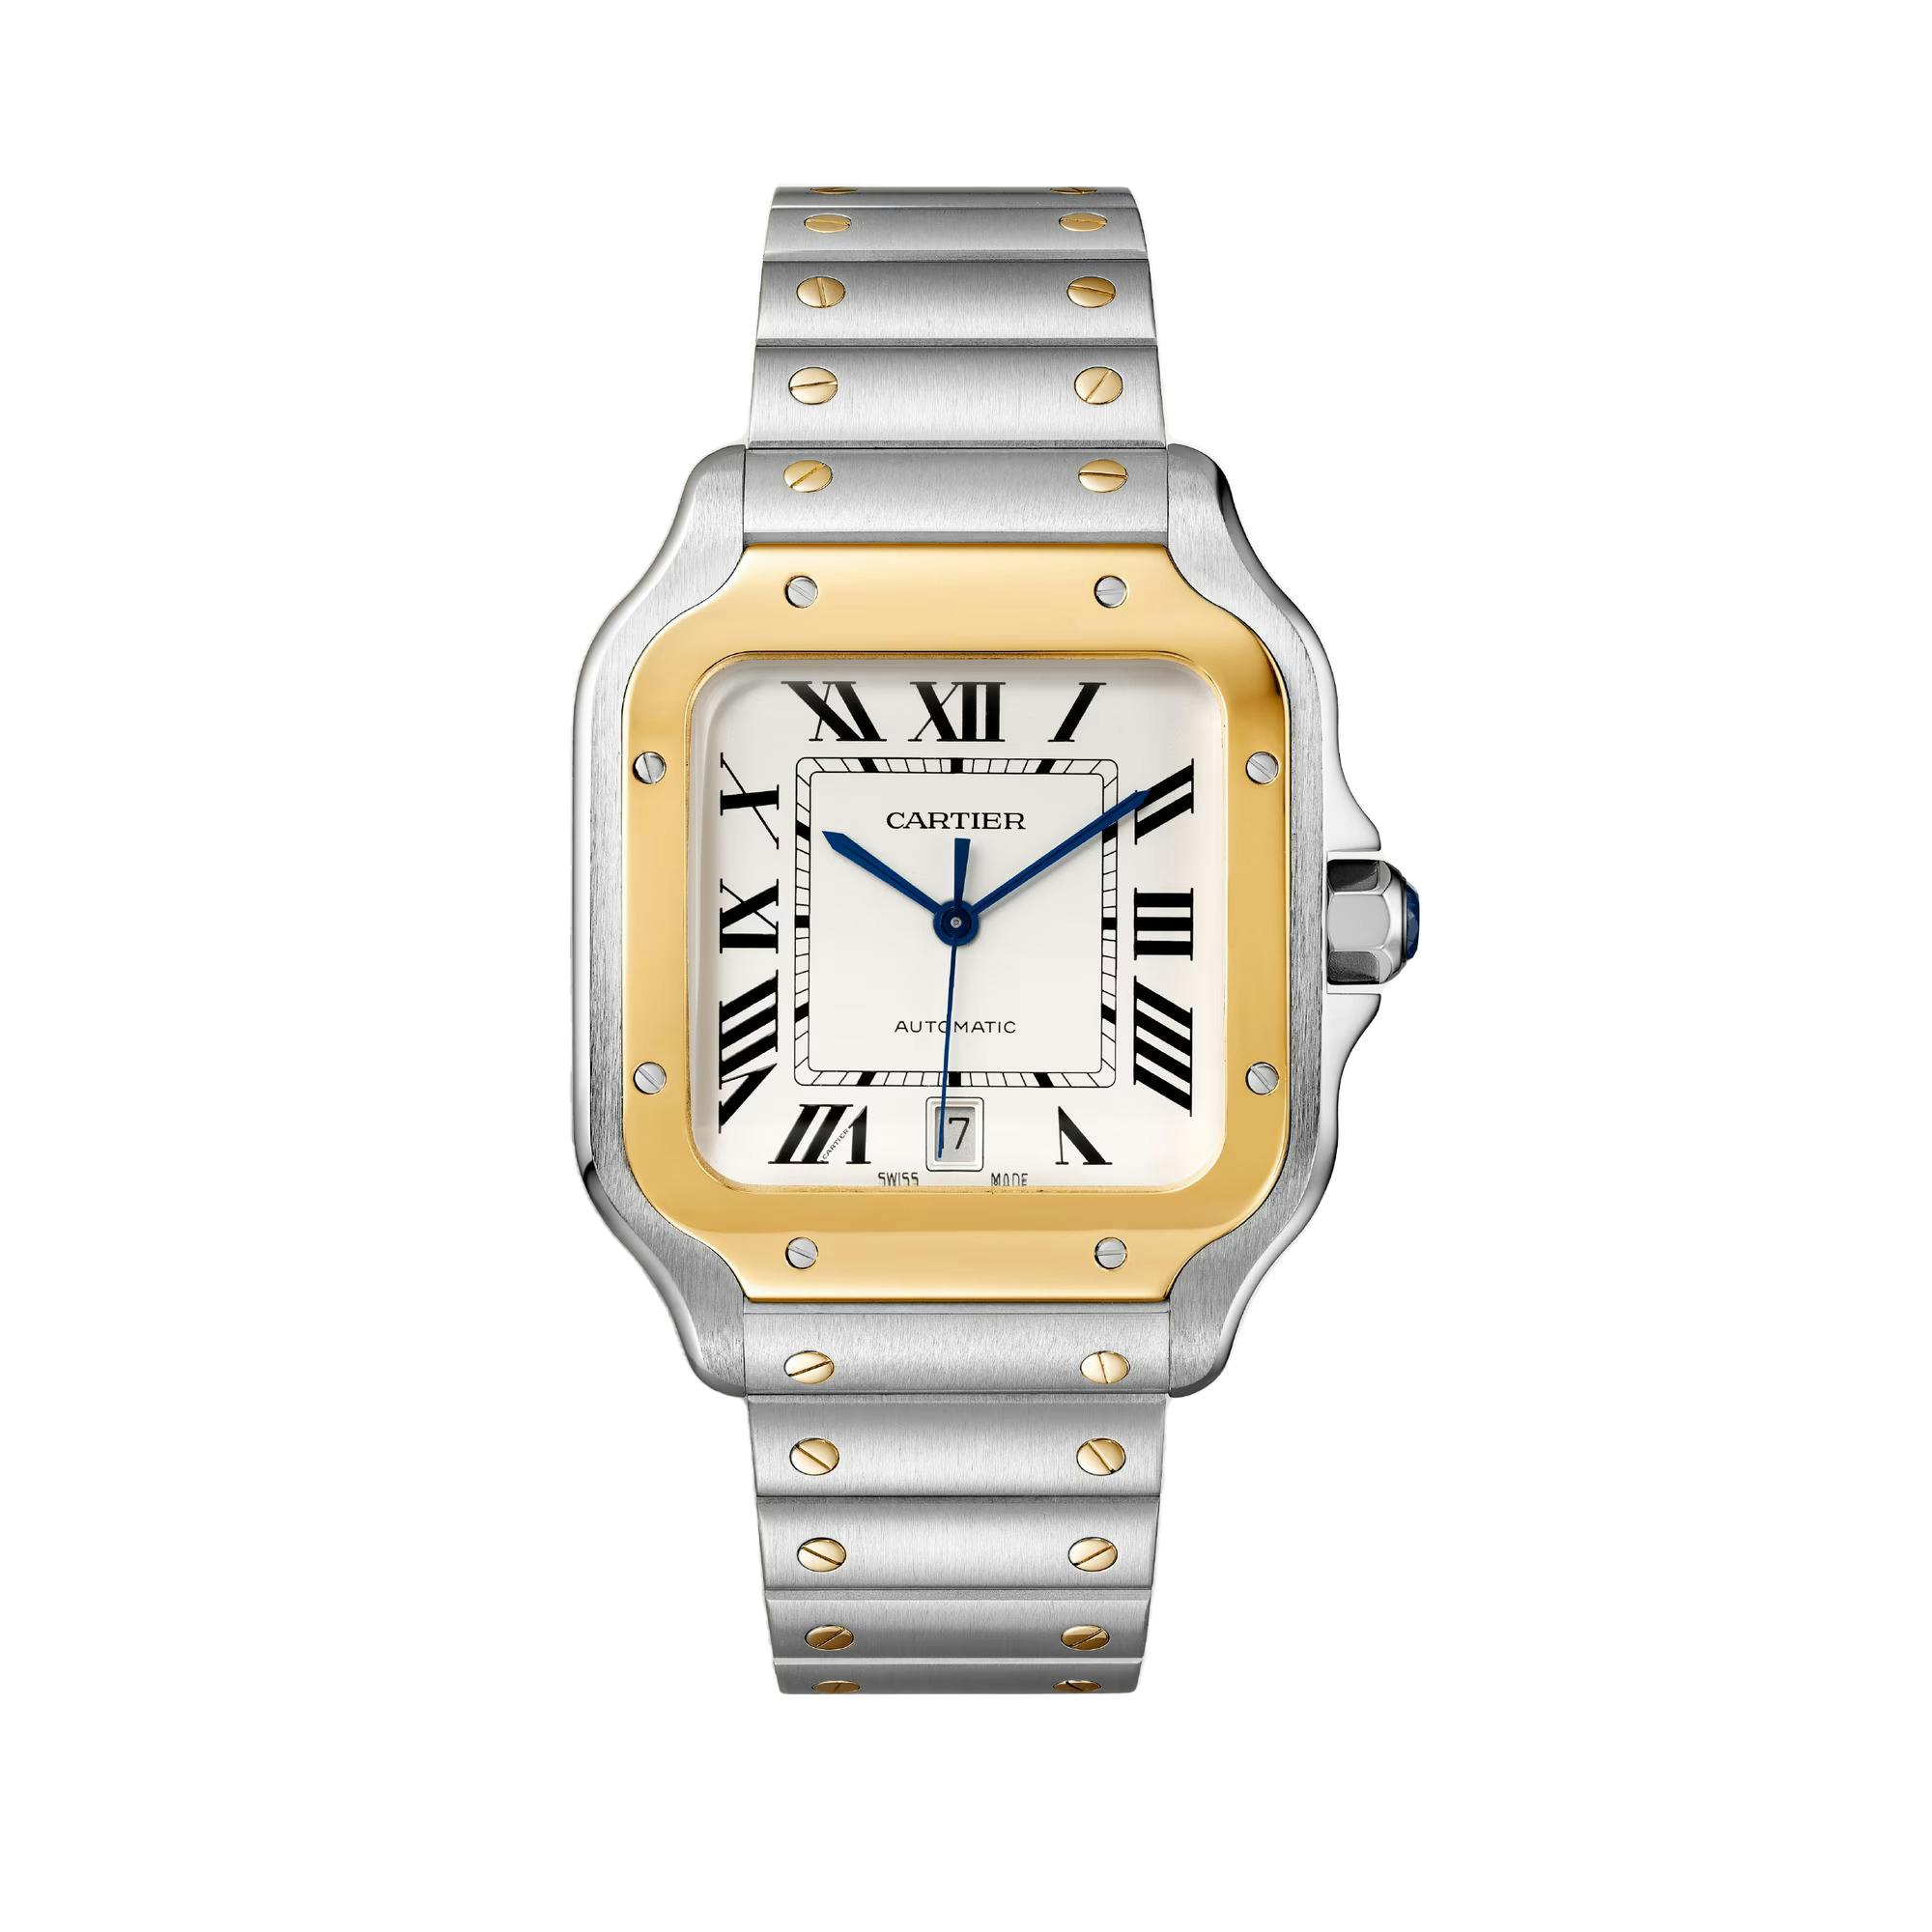 Santos de Cartier Watch with Yellow Gold, large model 0